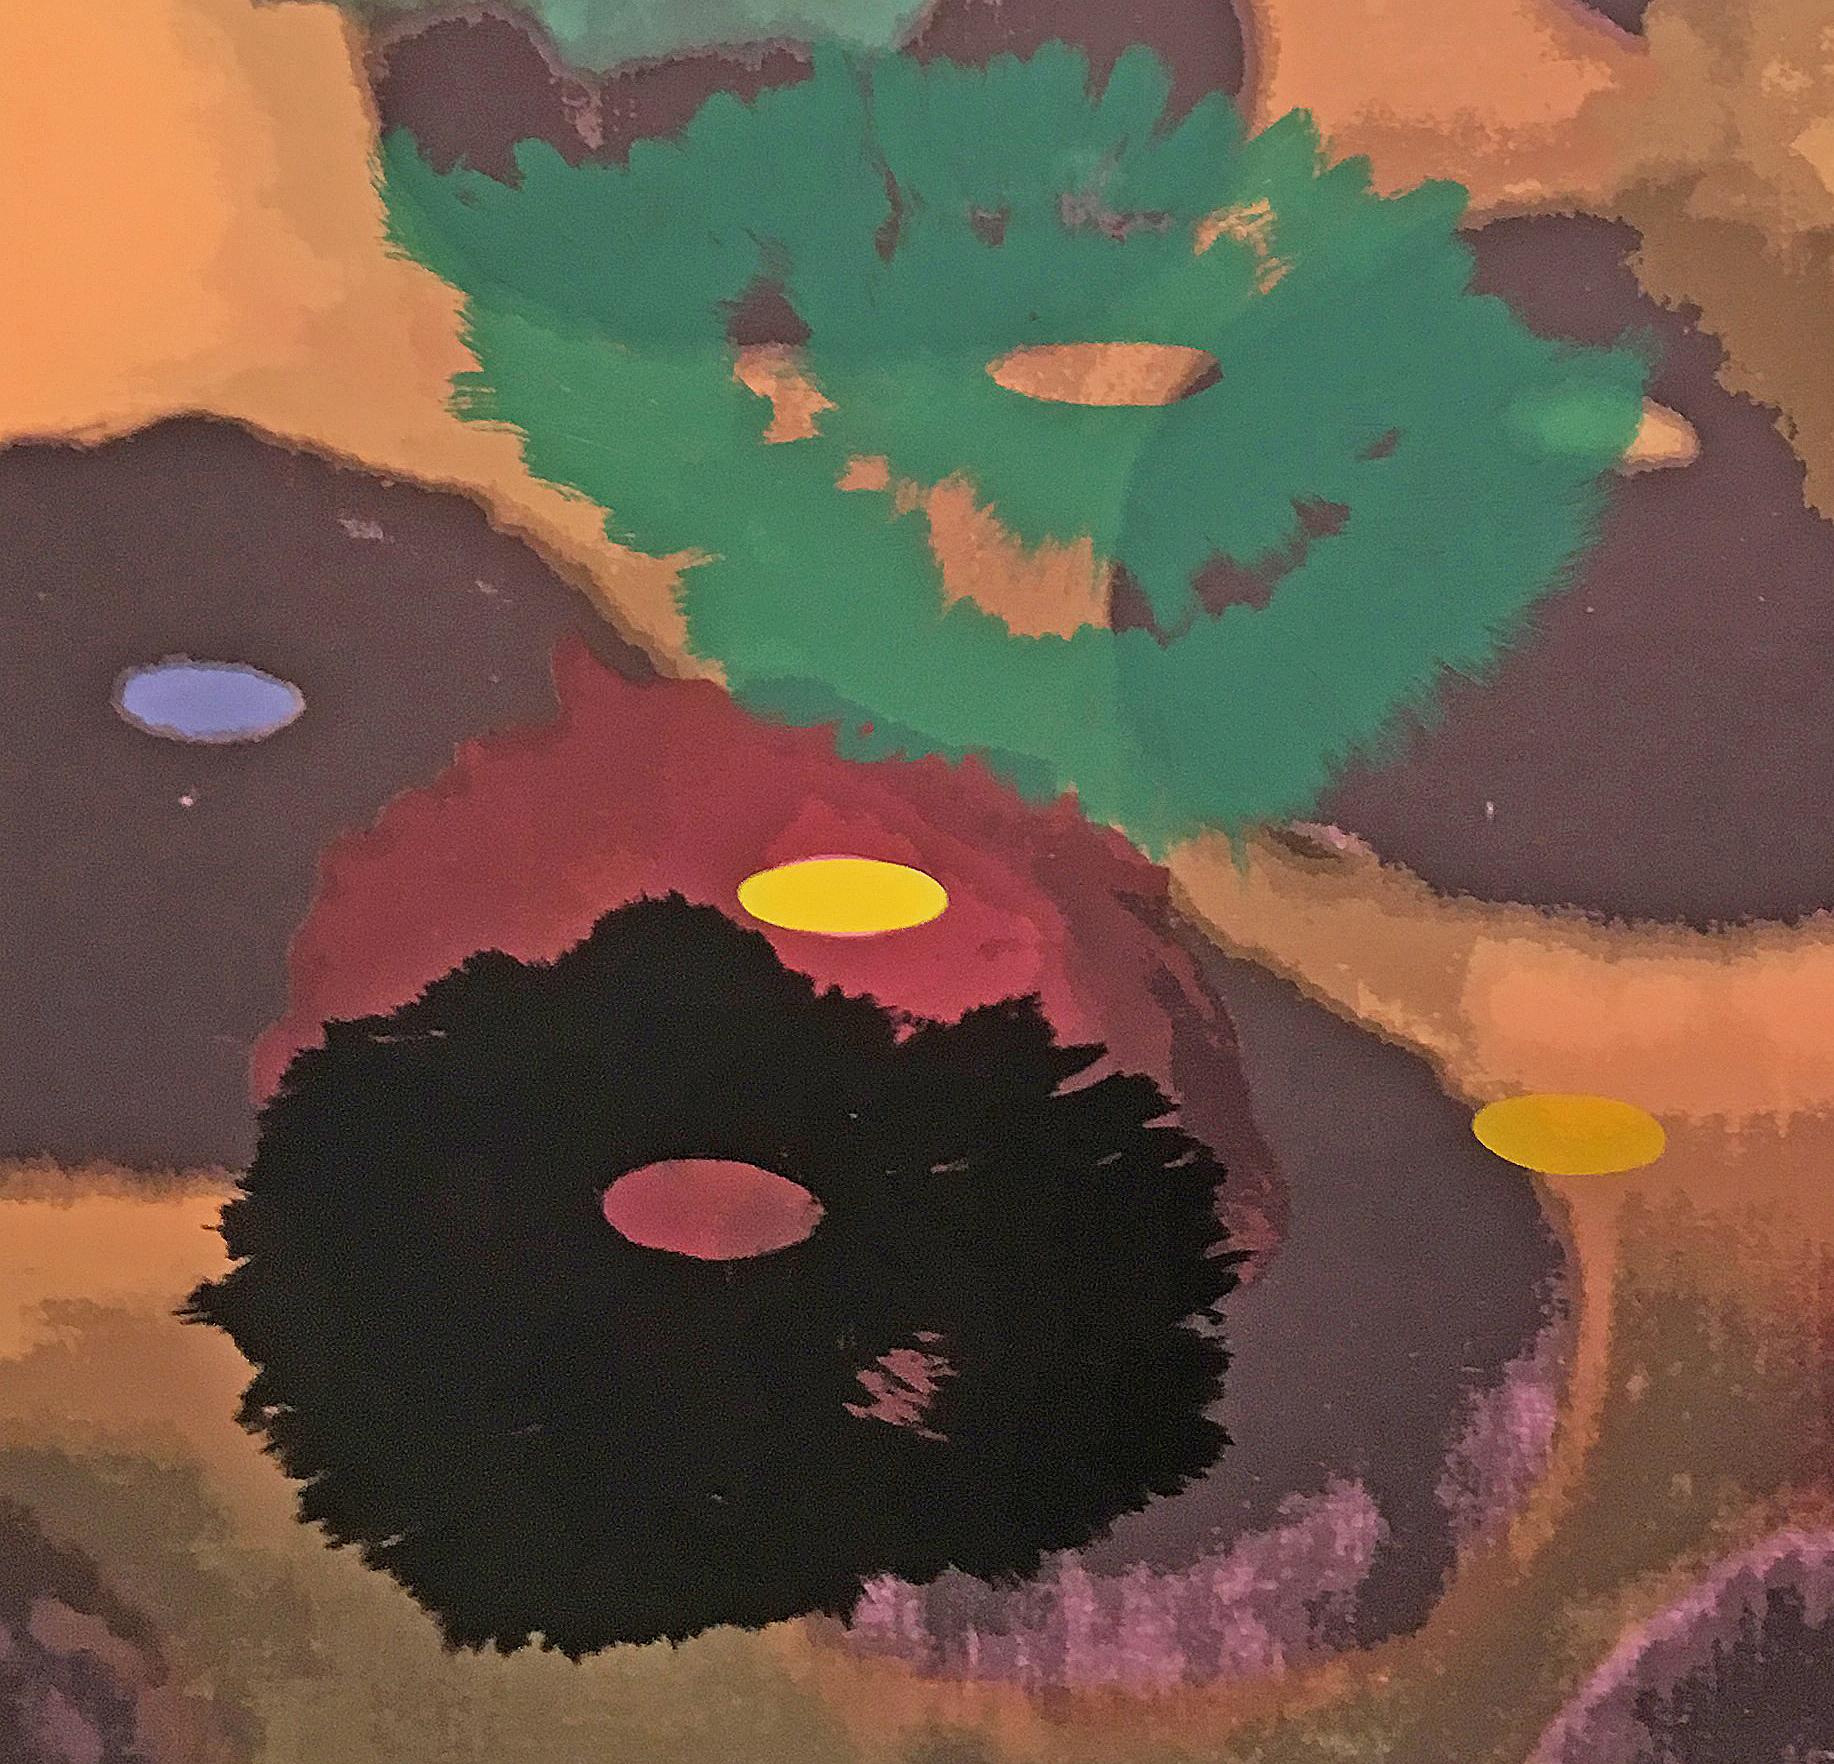 'PSII (From the Suite of 3)' 1997 by American artist, Ross Bleckner. 27-Color screen print, Ed. 48 of 75, 42 x 33 in. This screen print features a densly layered arrangement of abstracted, hazy florals in bright colors of purple, blue, green,